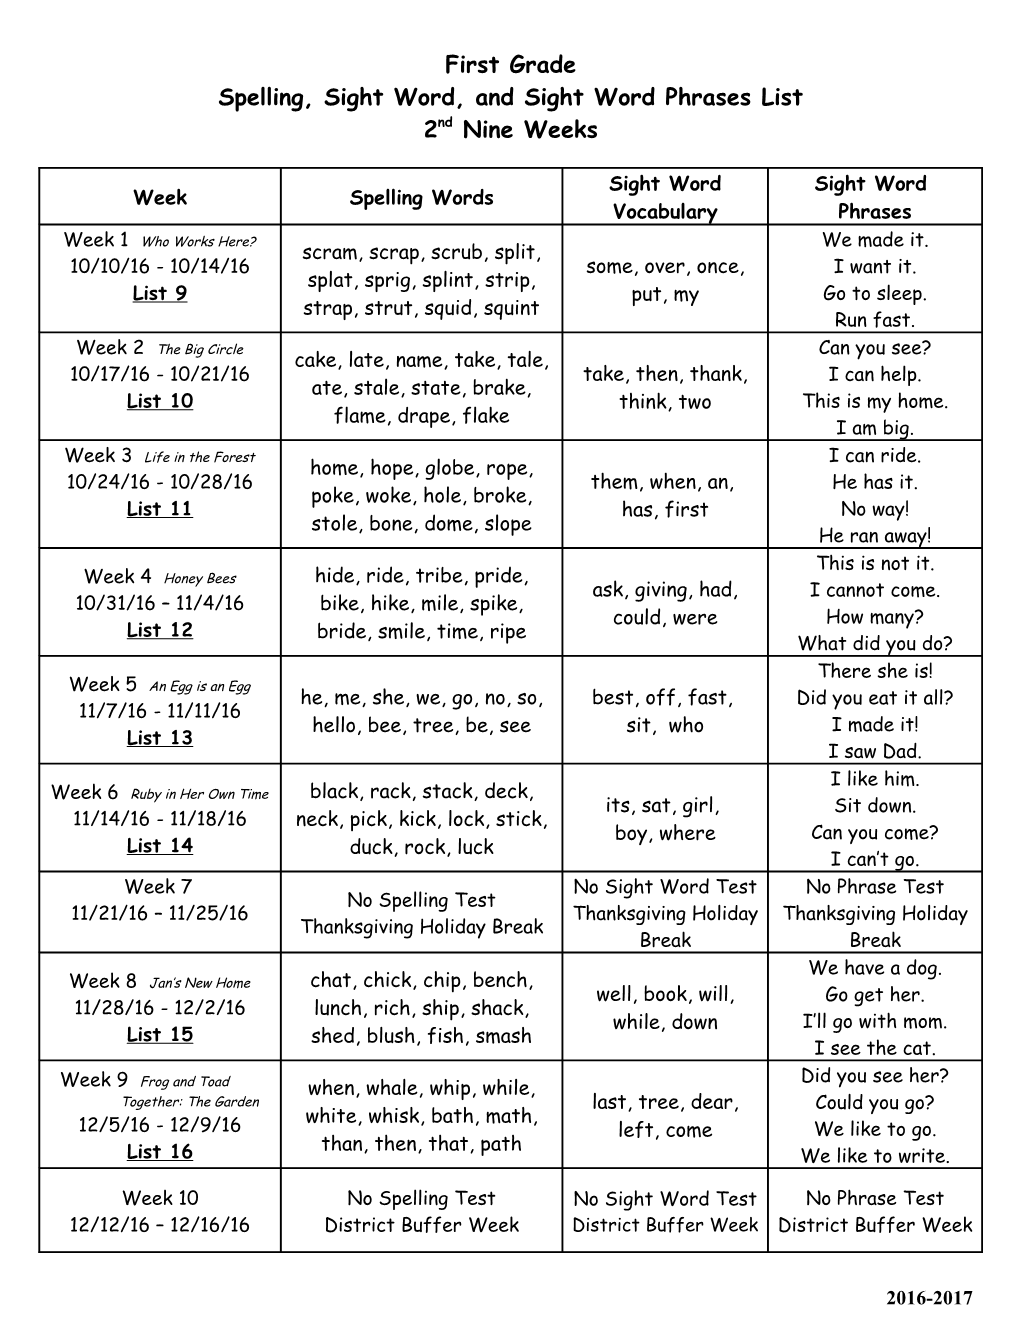 Spelling, Sight Word, and Sight Word Phrases List